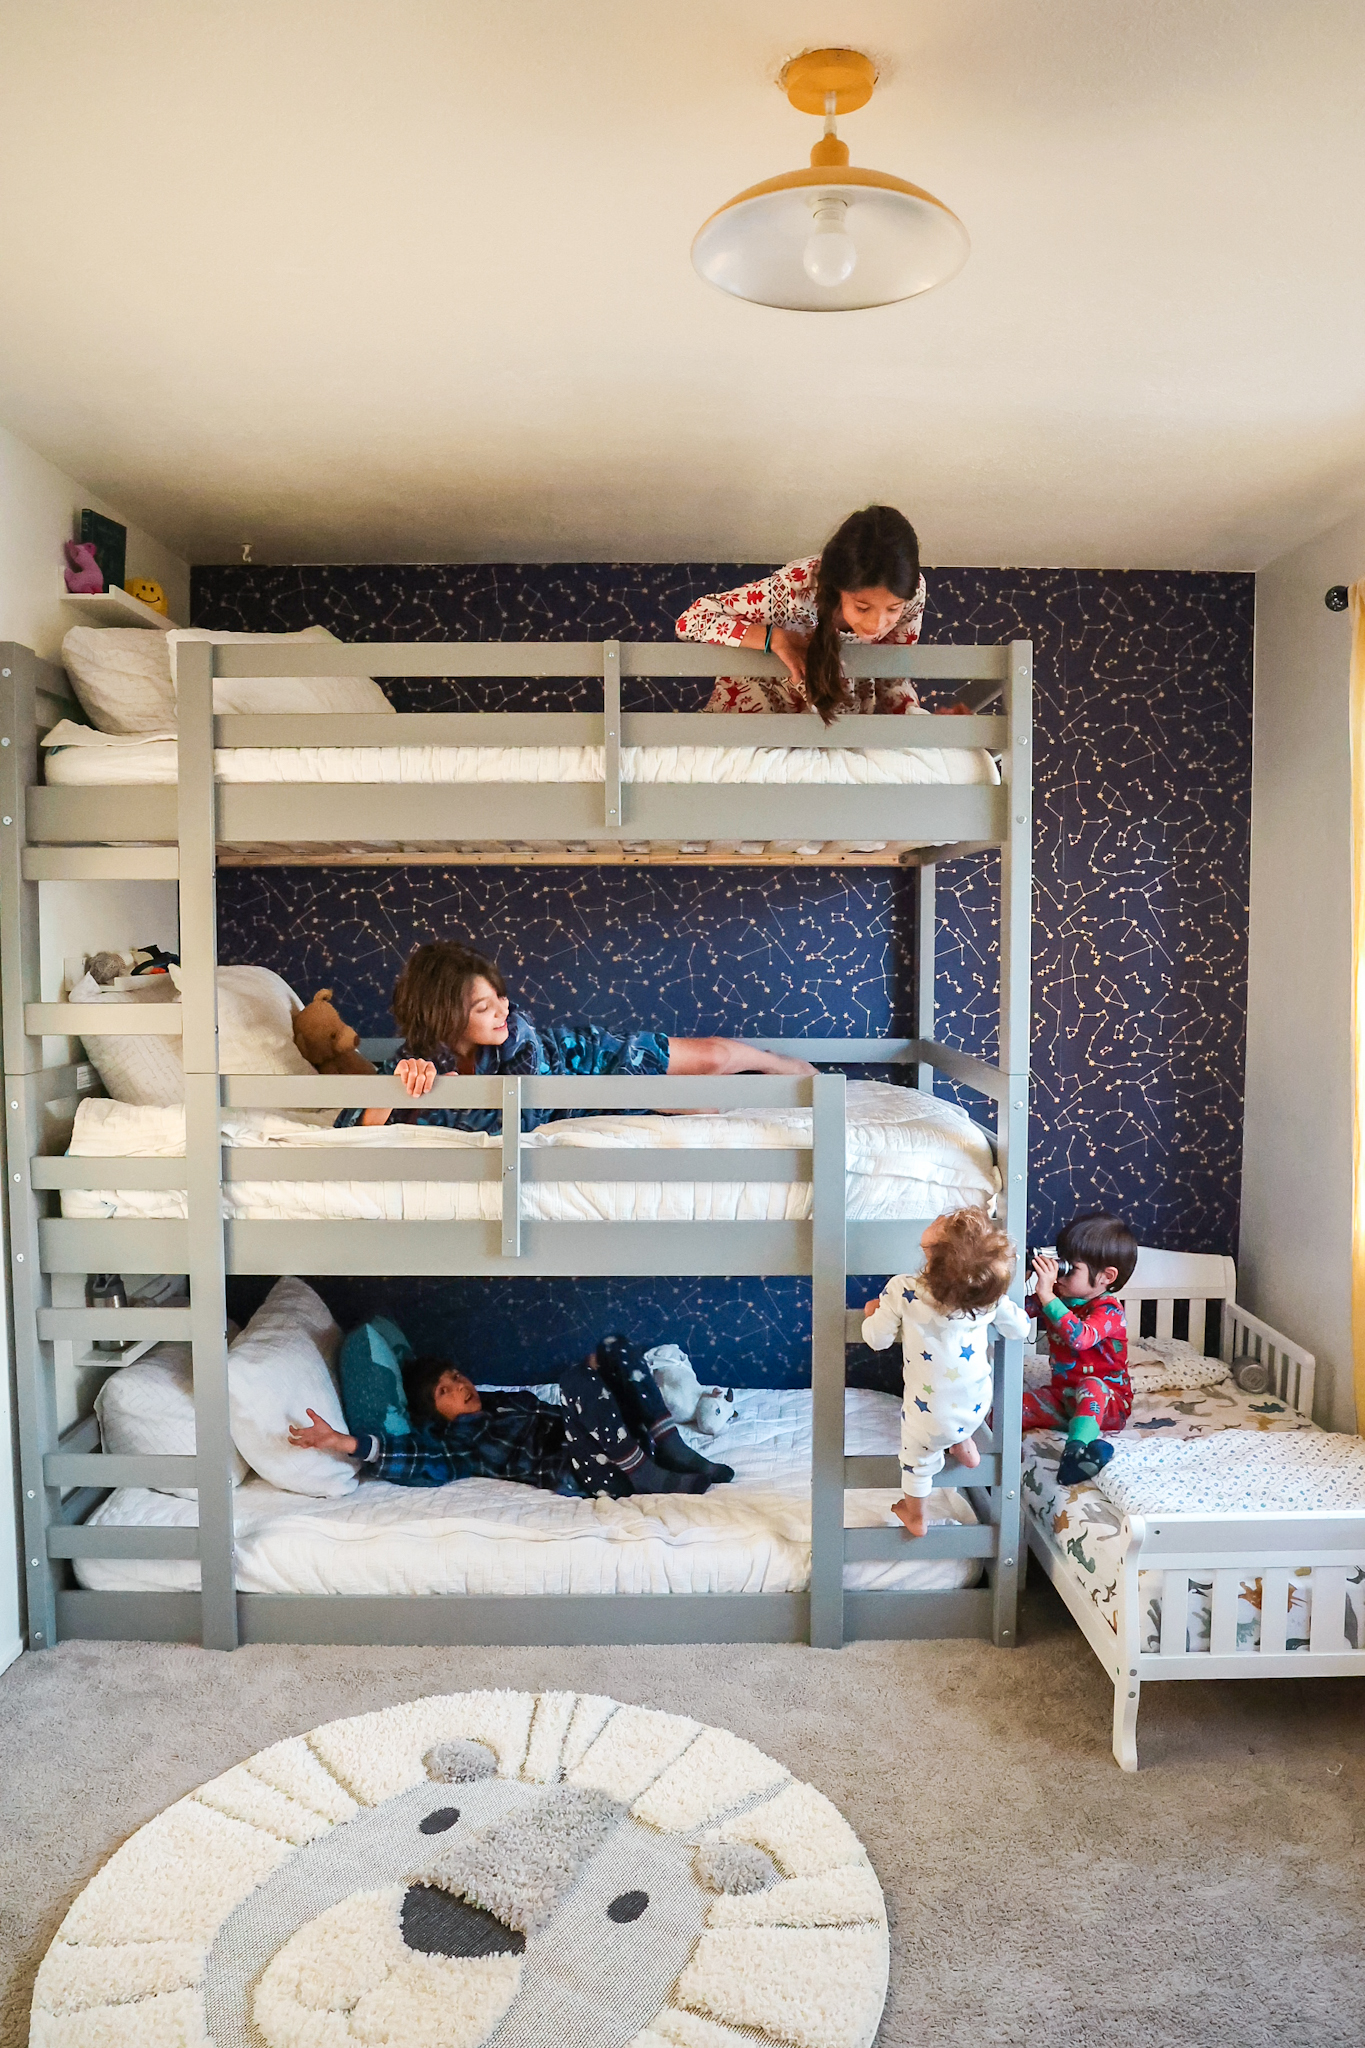 Our Kids Triple Bunk Room Local, Bunk Bed Room